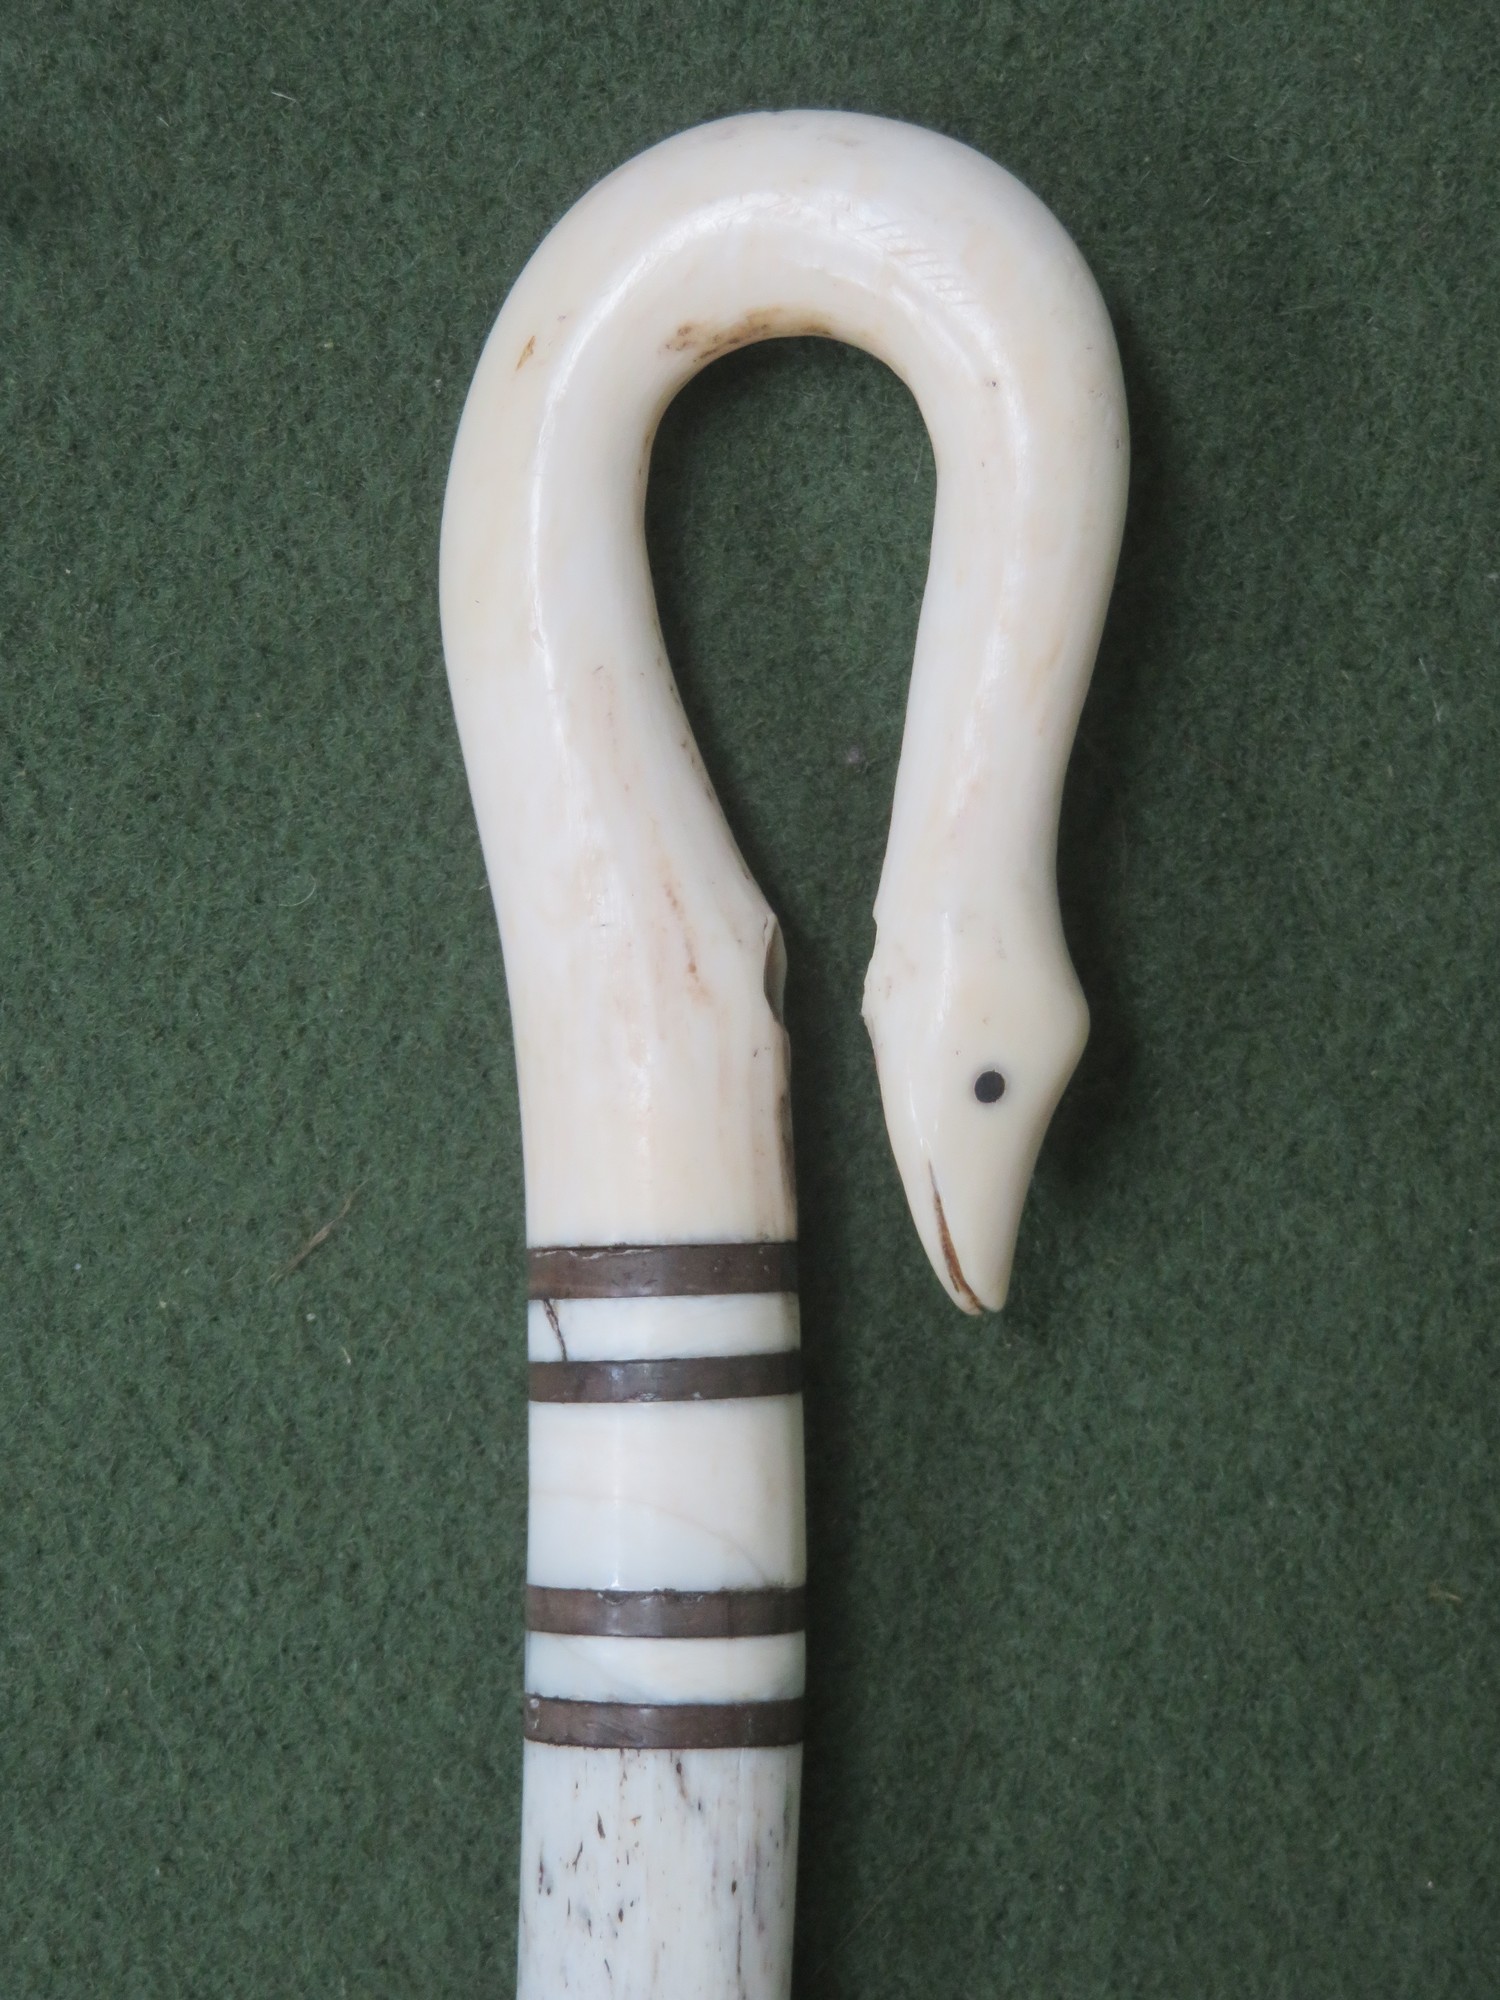 18th century speckled whale bone turned walking stick, with hand carved ivory serpent form handle.